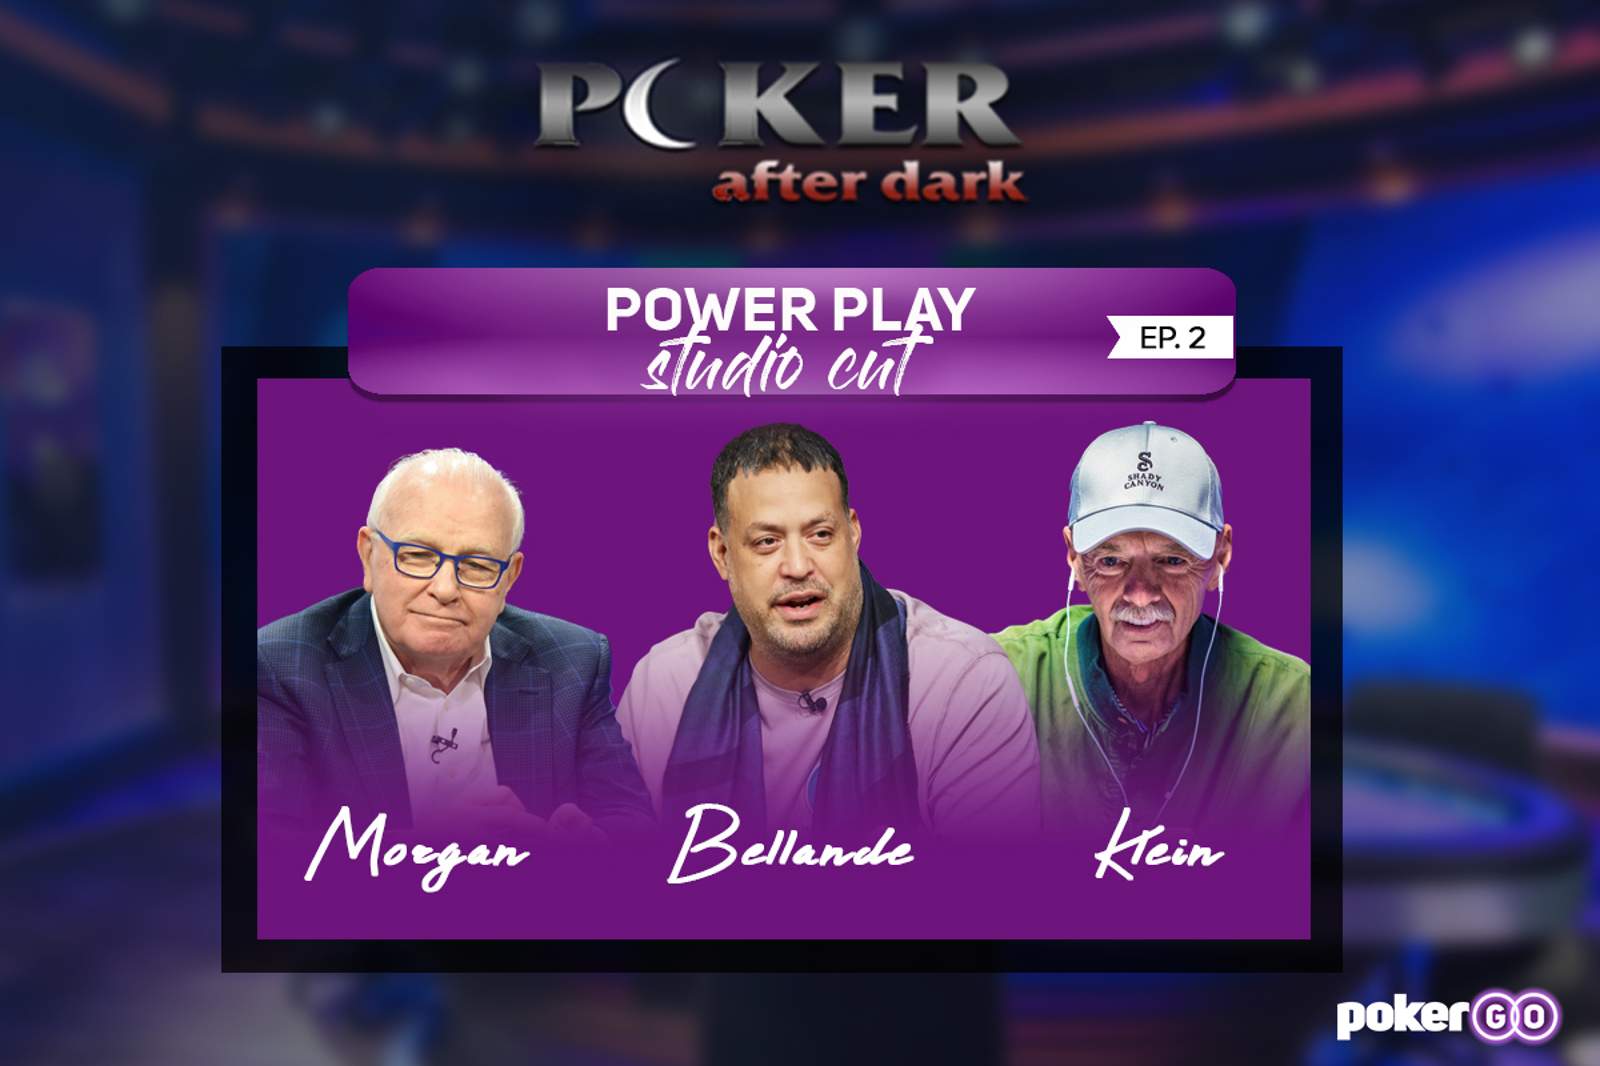 Poker After Dark Power Play Studio Cut Episode 2 on Tonight at 8 p.m. ET